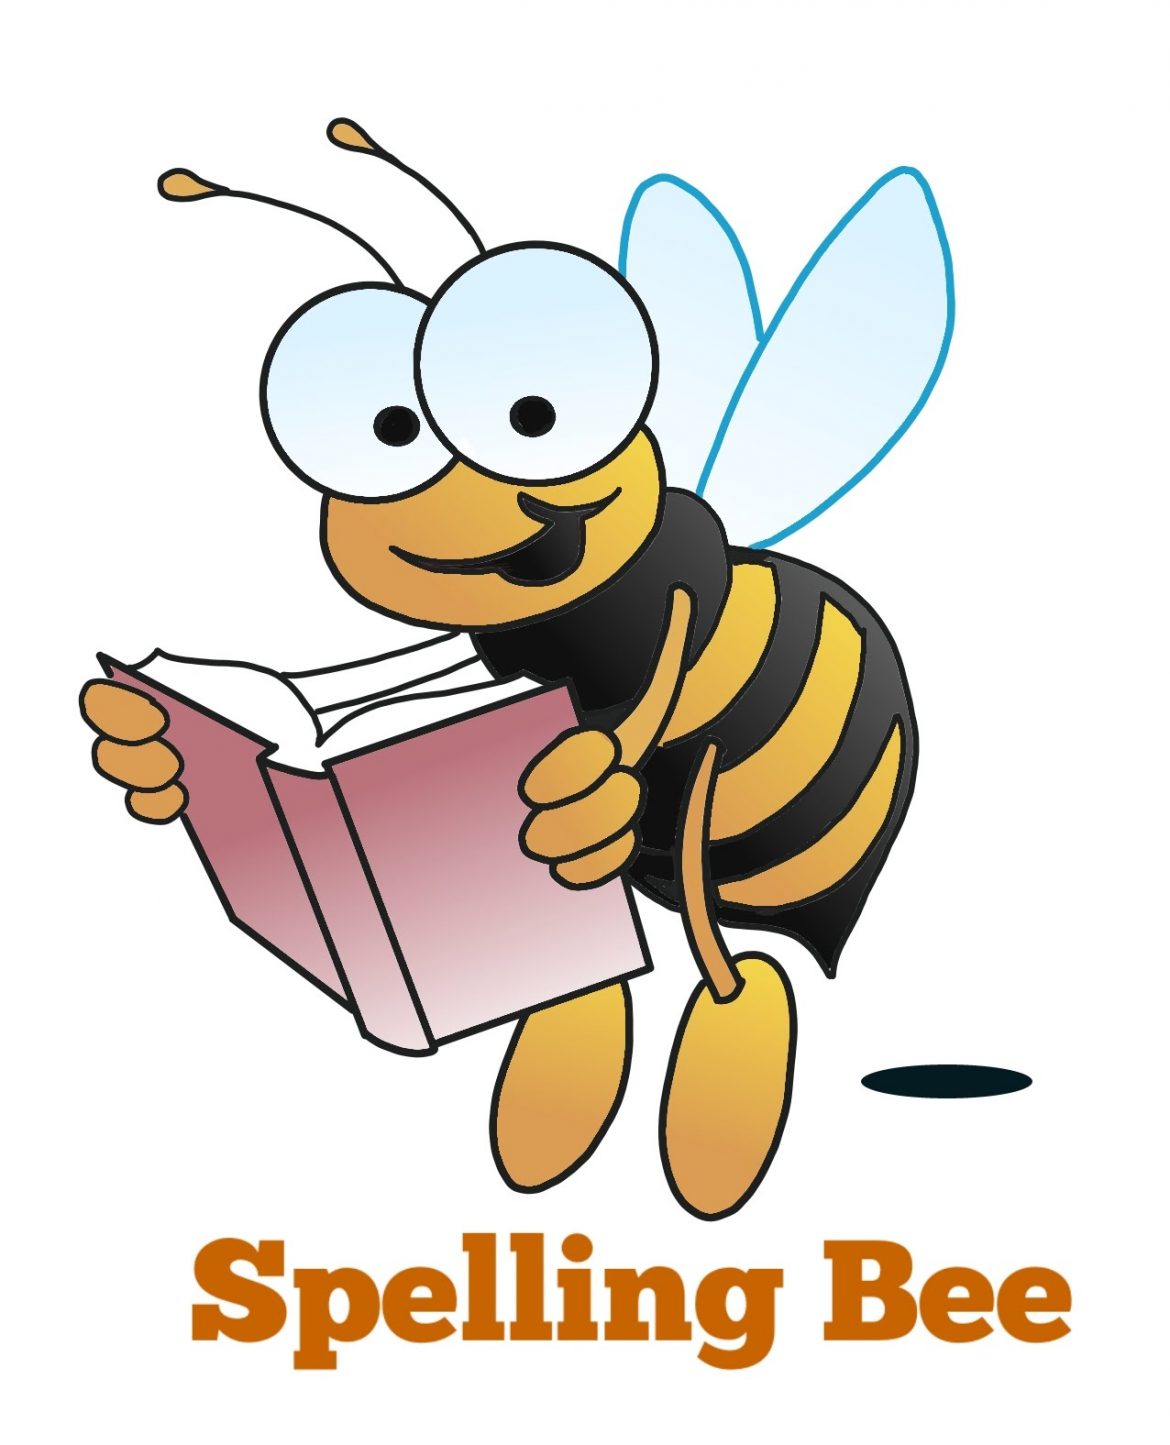 How can adult improve their writing skills through spelling bee: A Complete Guide